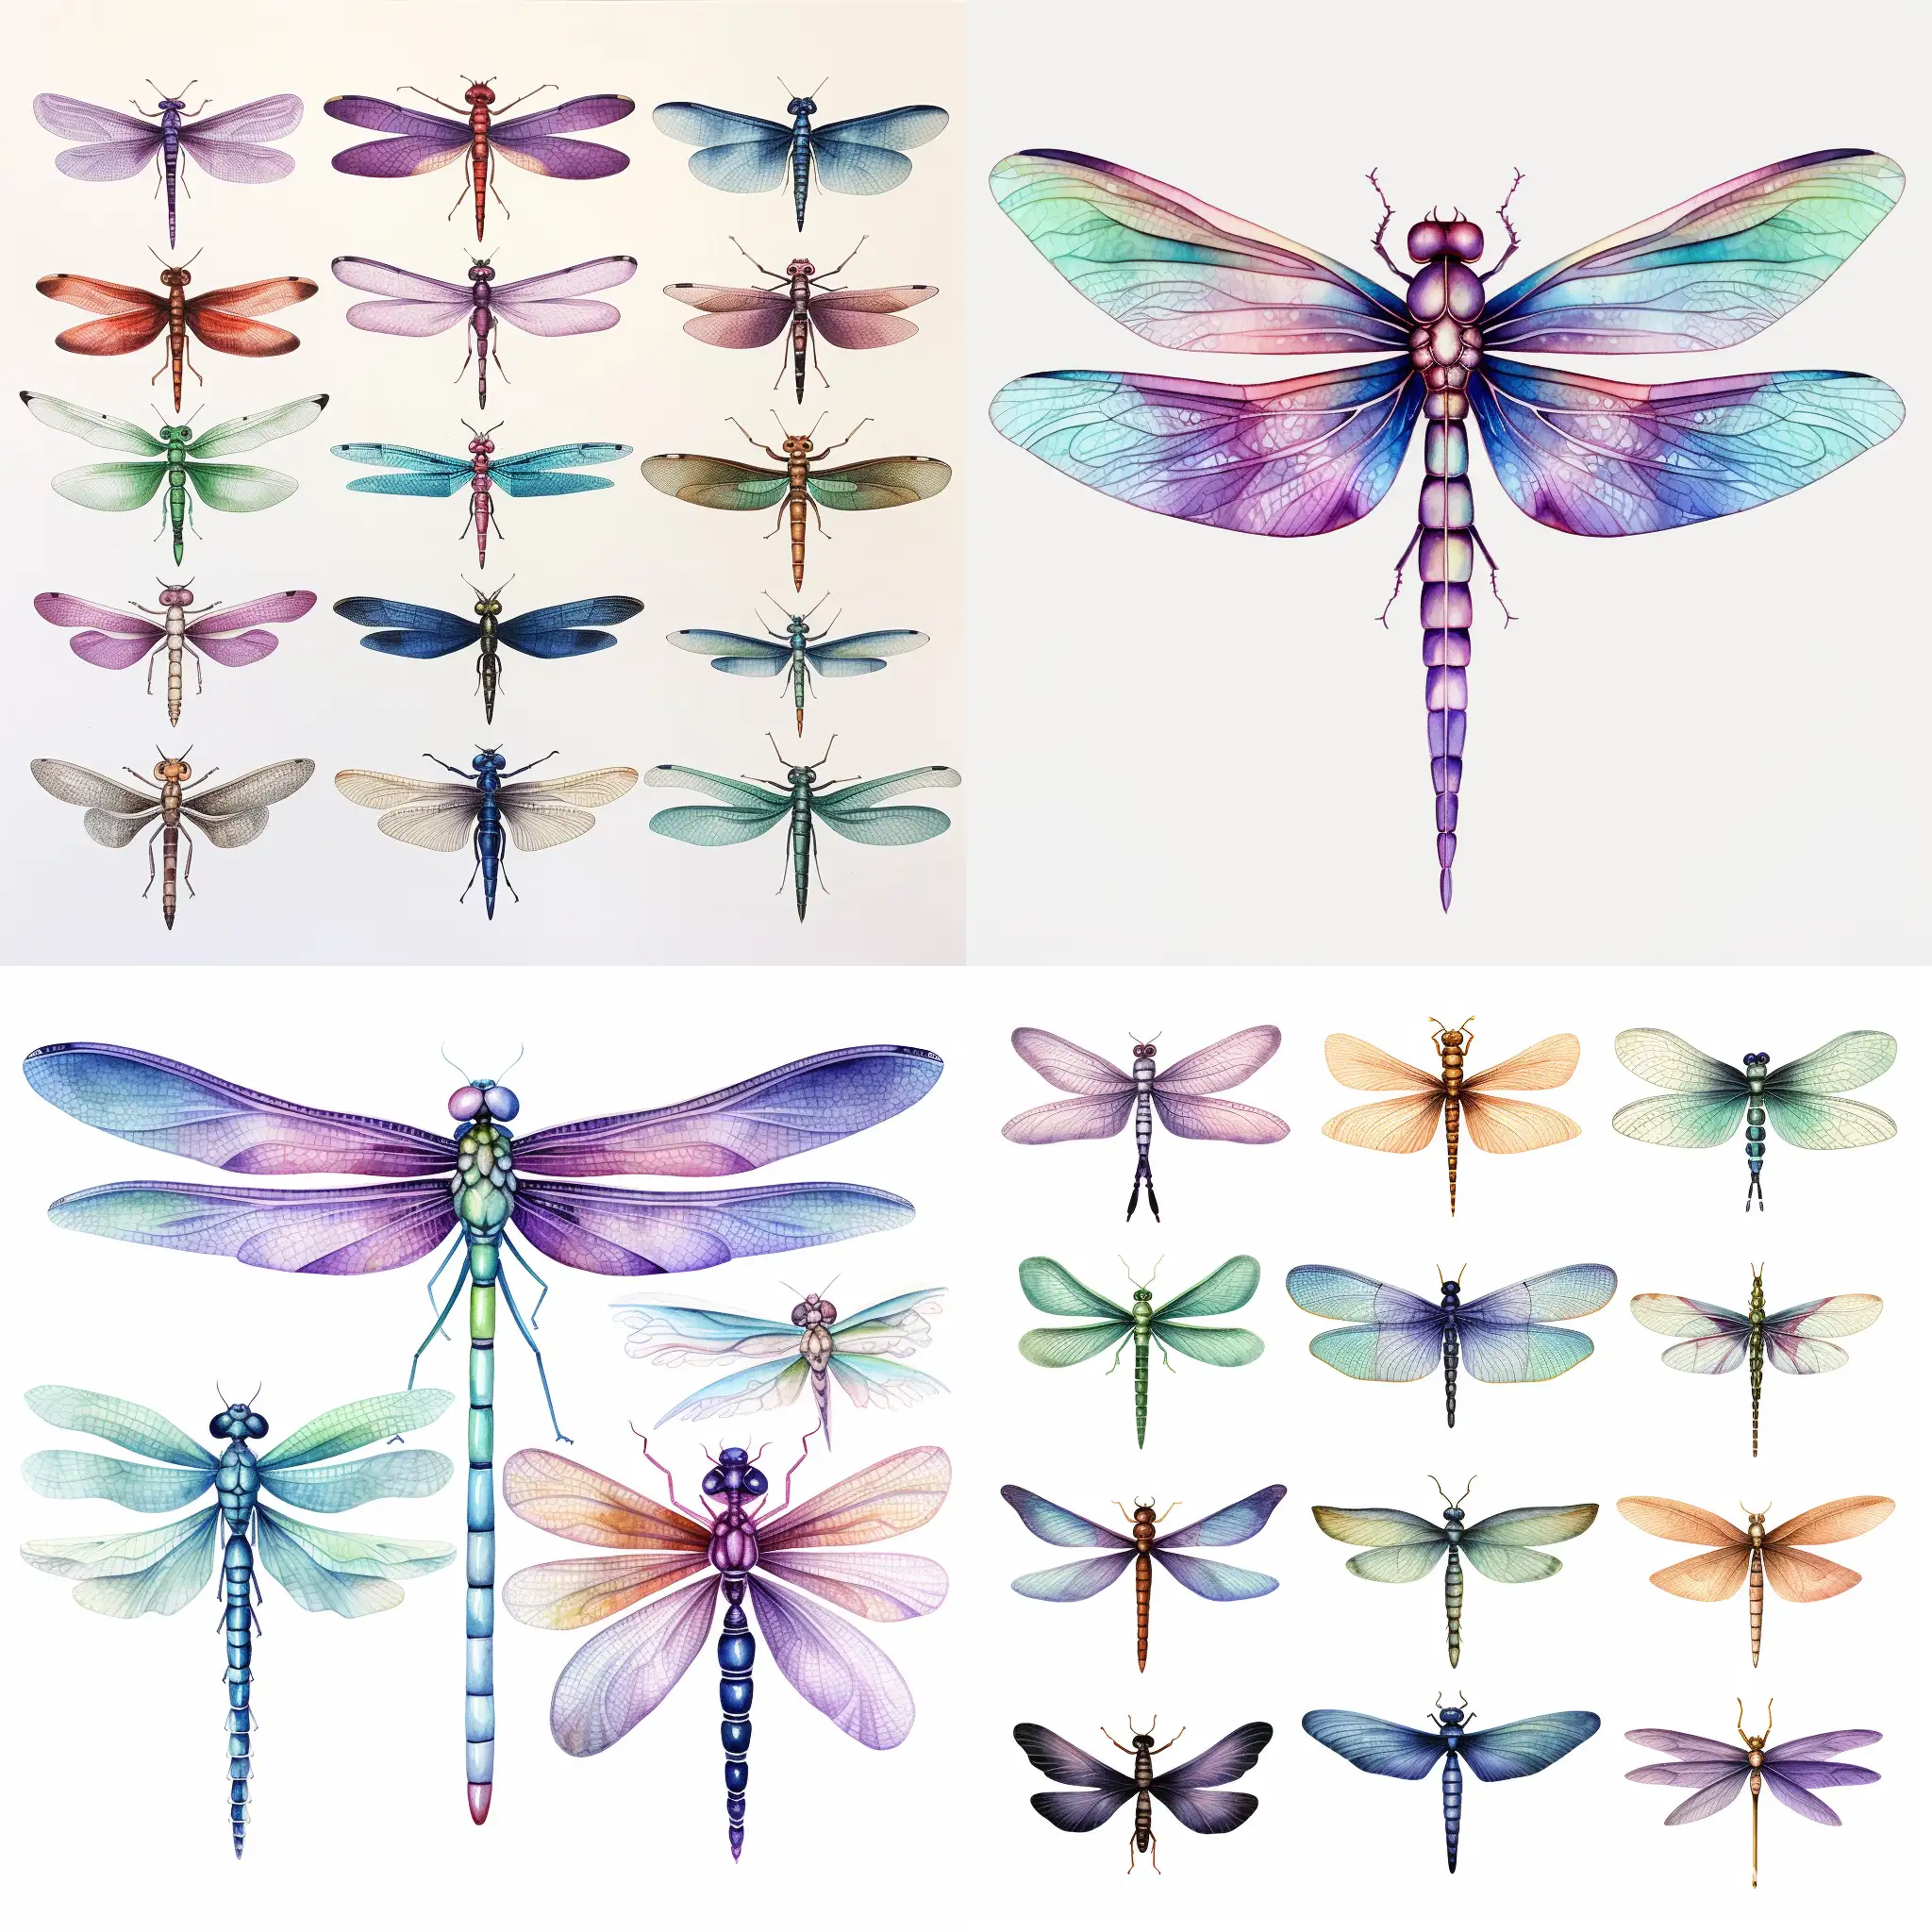 watercolor dragonfly different varieties 